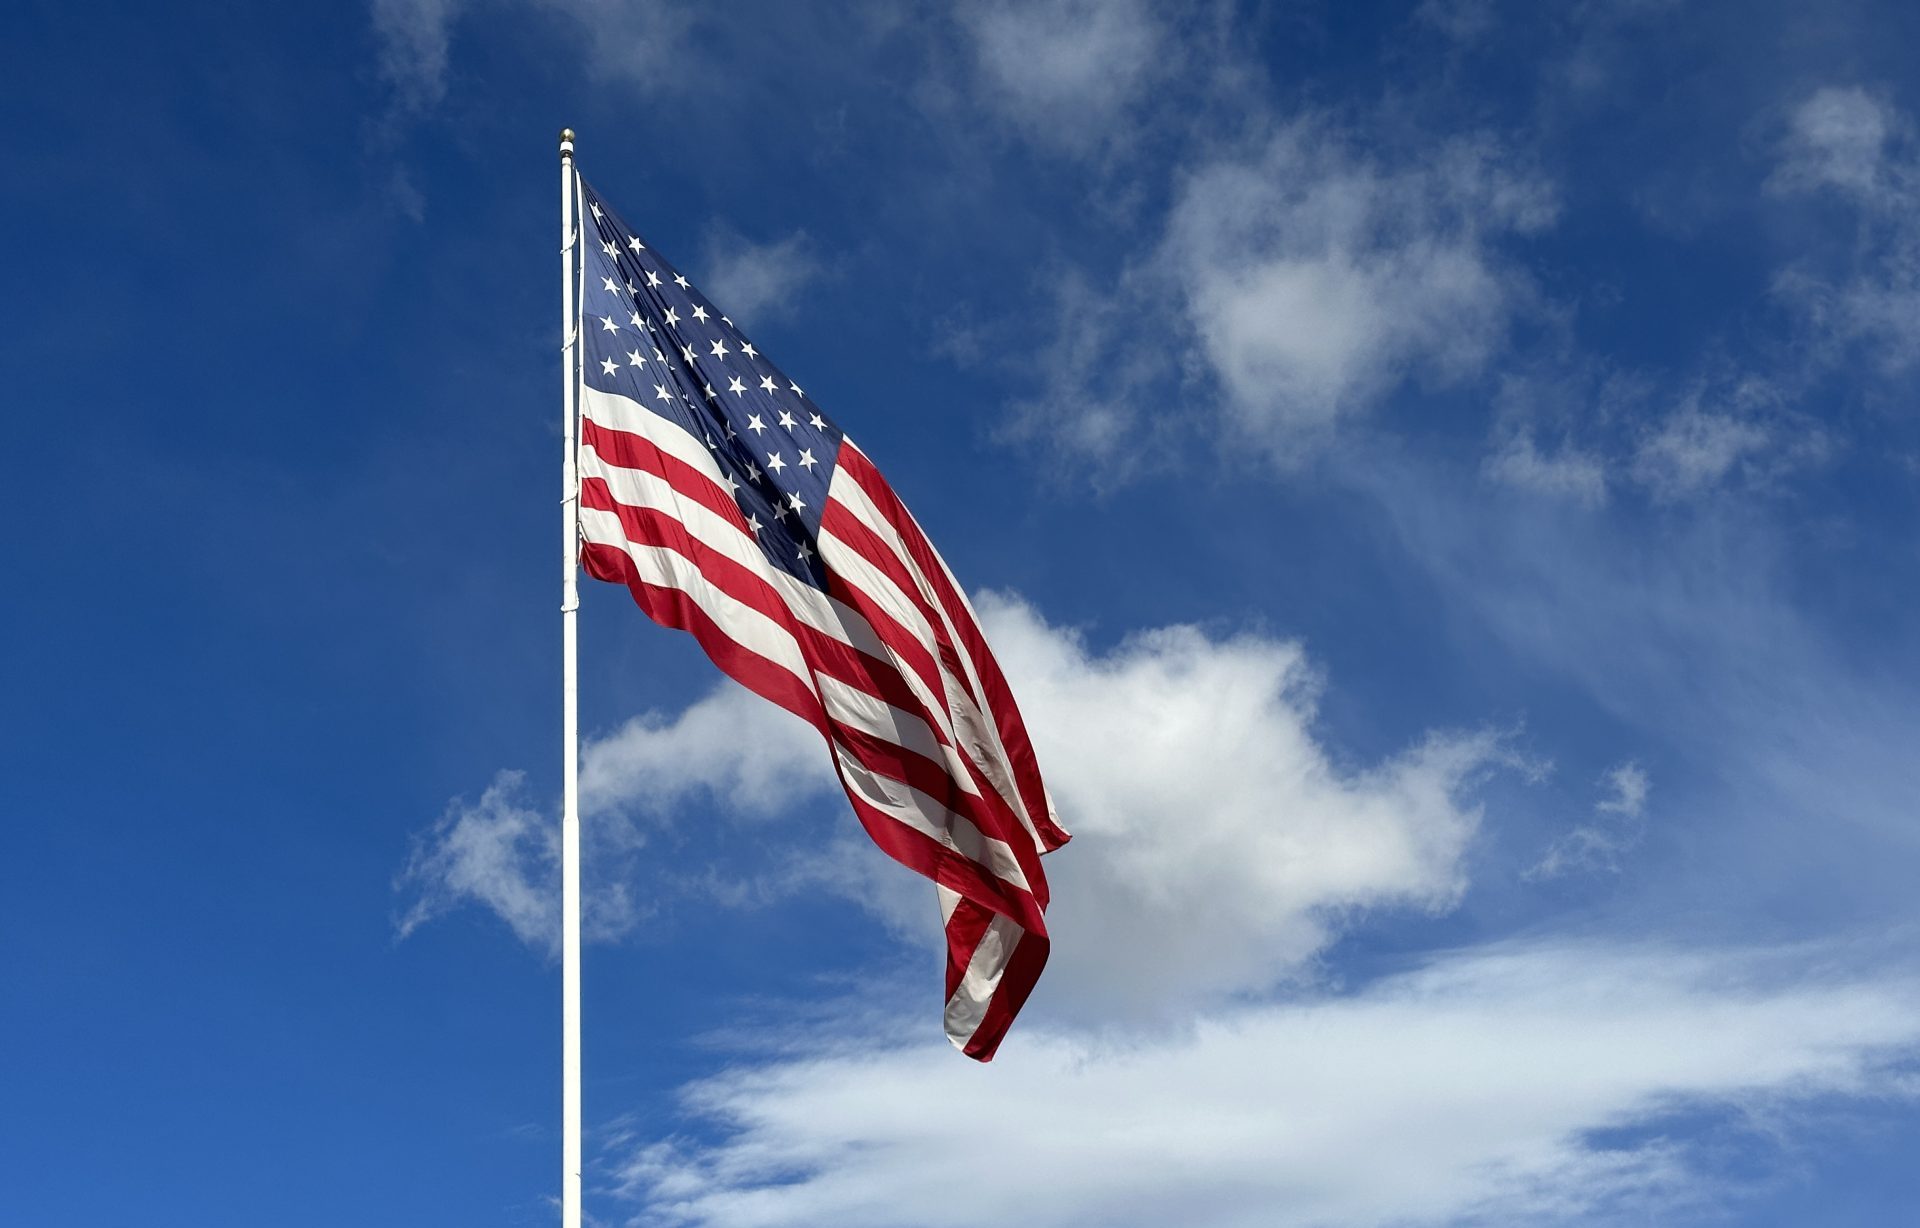 American flag blowing in the wind with a partly cloudy blue sky, USA